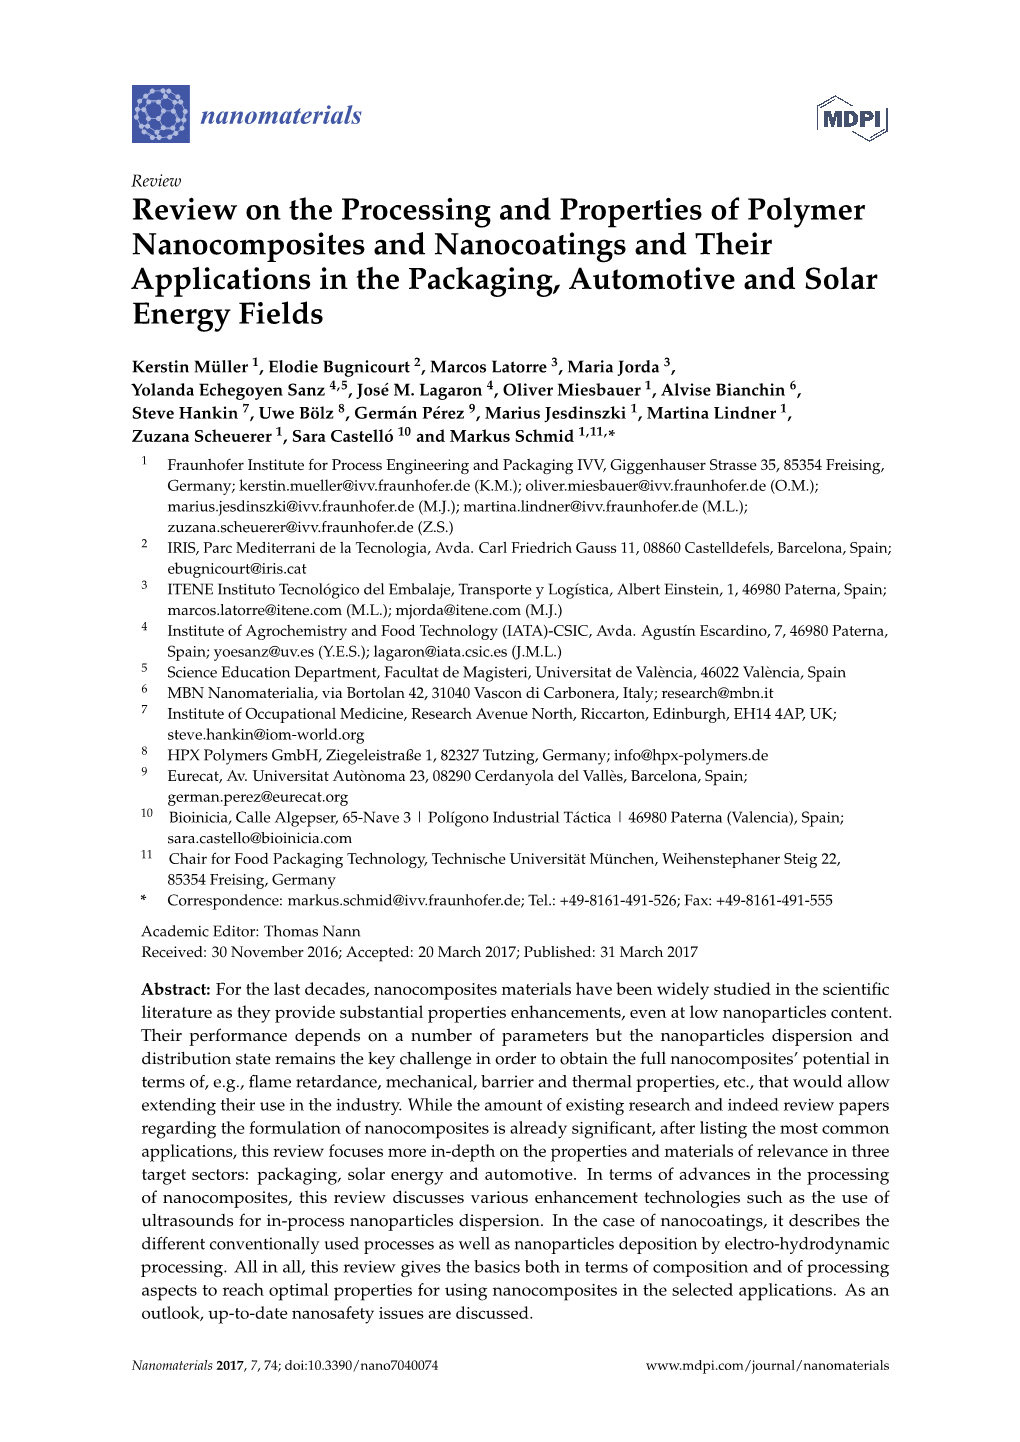 Review on the Processing and Properties of Polymer Nanocomposites and Nanocoatings and Their Applications in the Packaging, Automotive and Solar Energy Fields